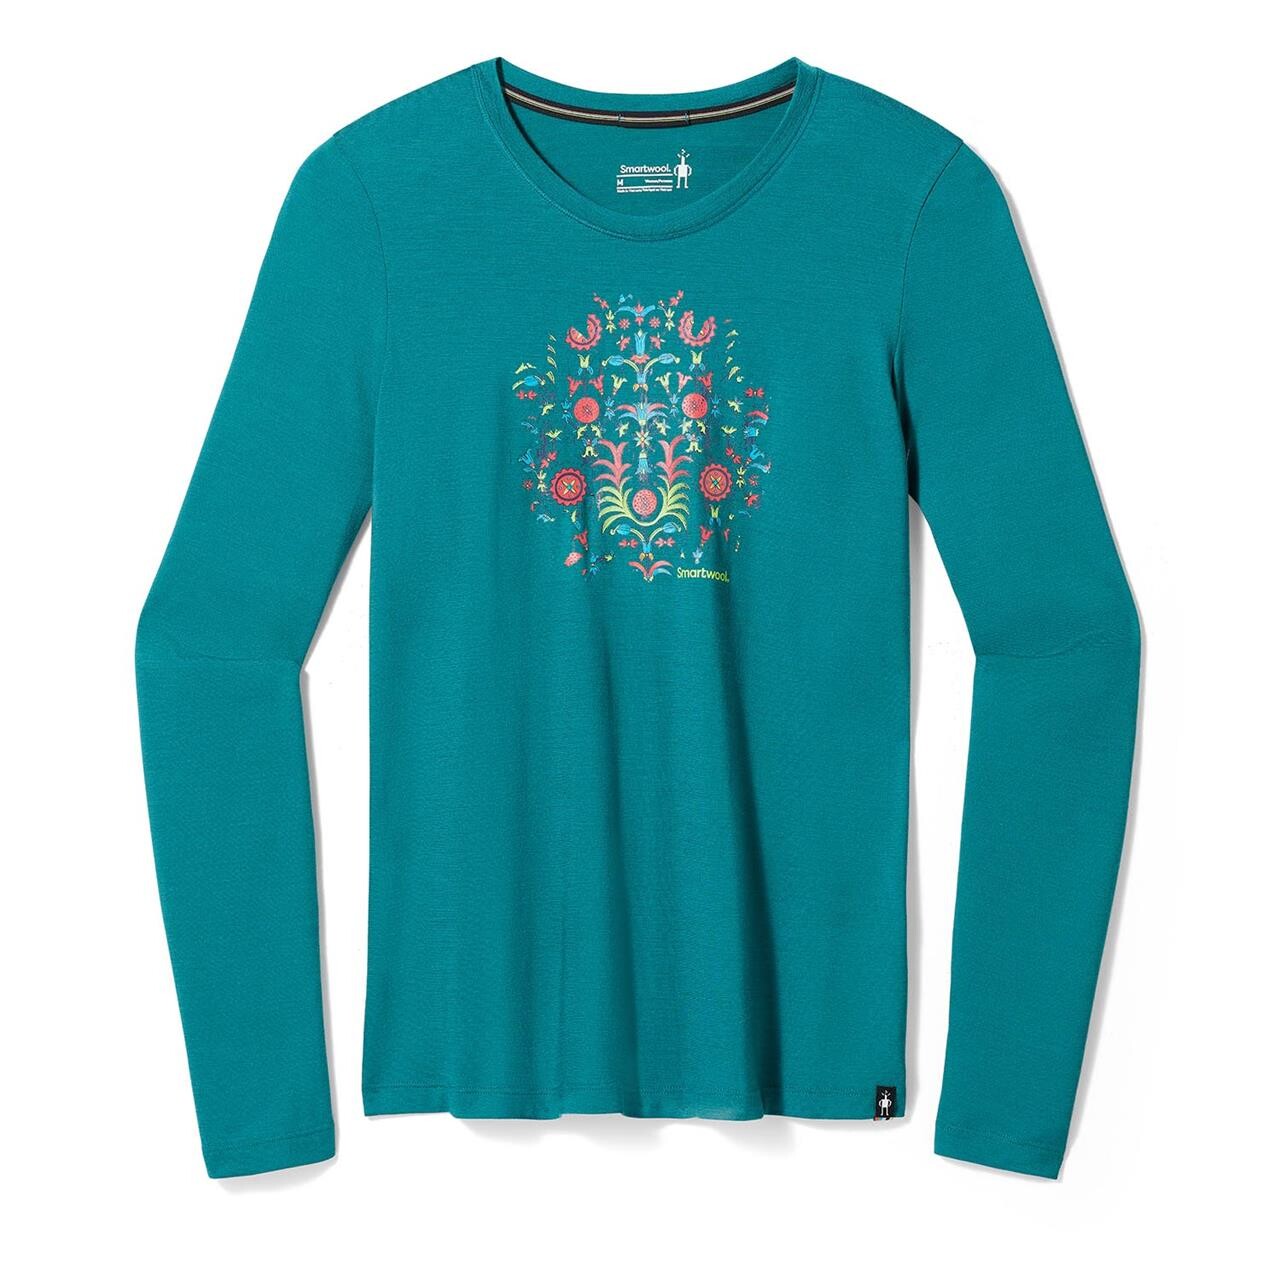 Billede af Smartwool Womens Floral Tundra Graphic L/S Tee (Grøn (EMERALD GREEN) Small)